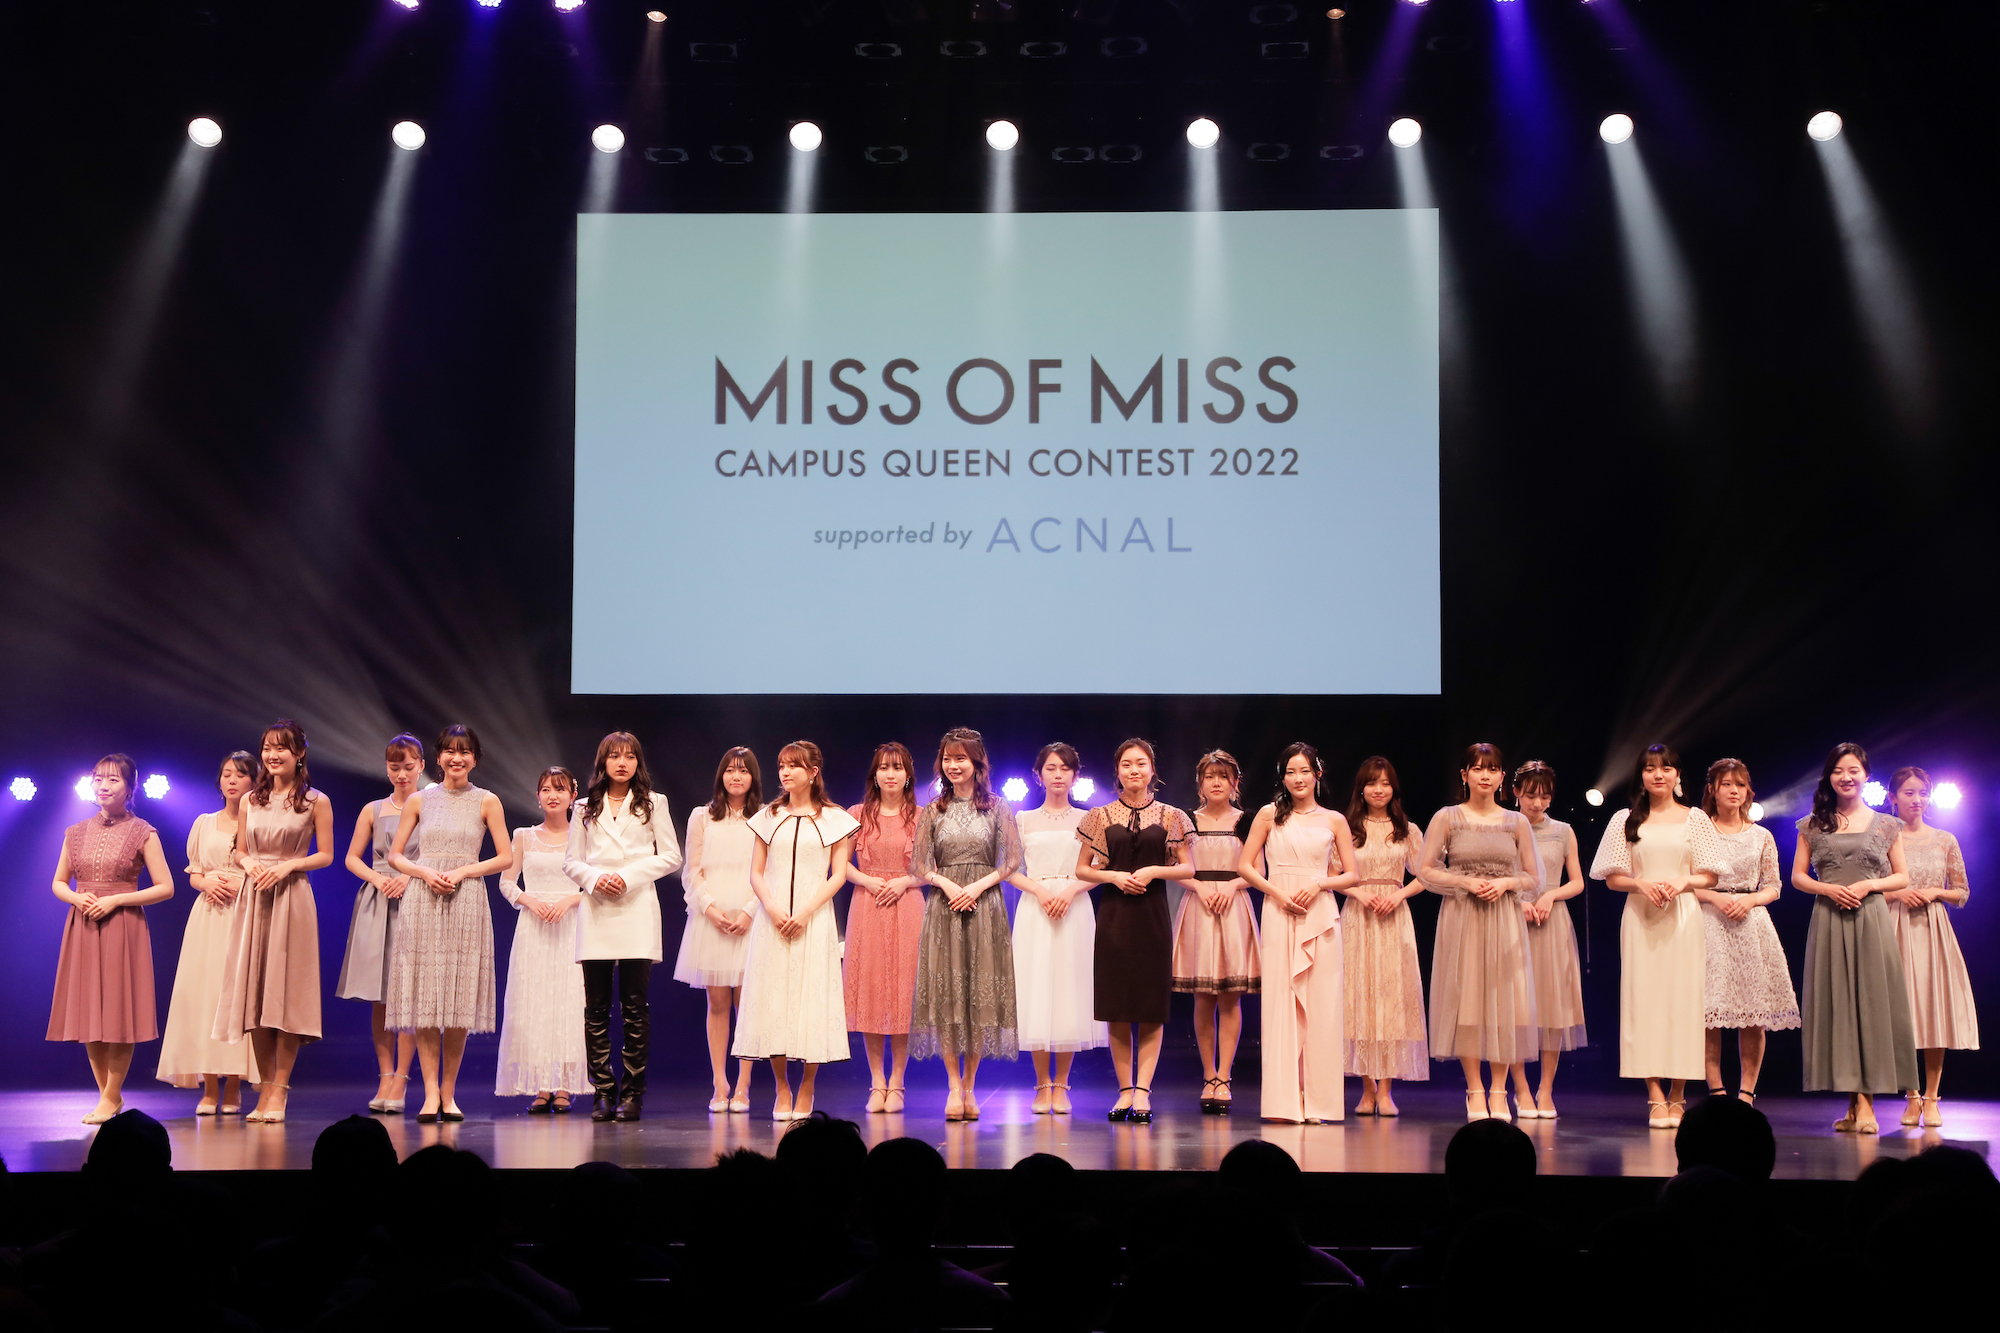 MISS OF MISS CAMPUS QUEEN CONTEST 2022